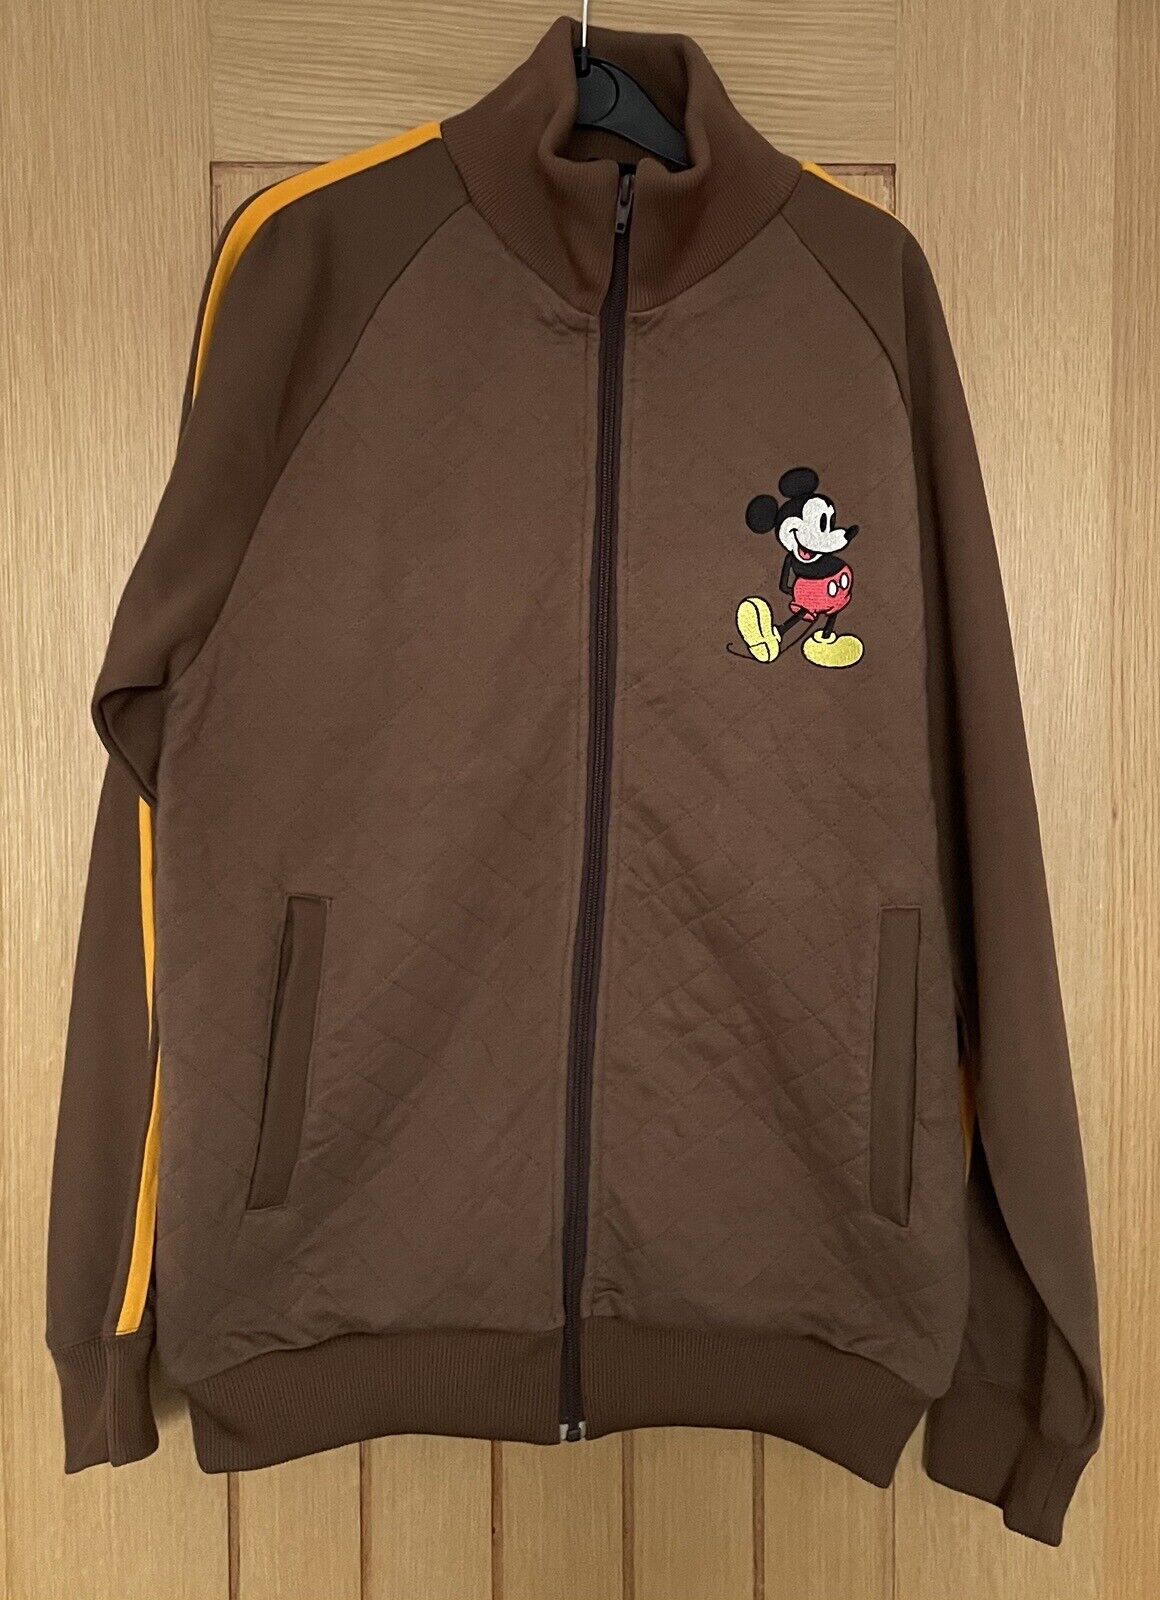 Vintage Official Disney Mickey Mouse Zip Up Top Size Medium Brown